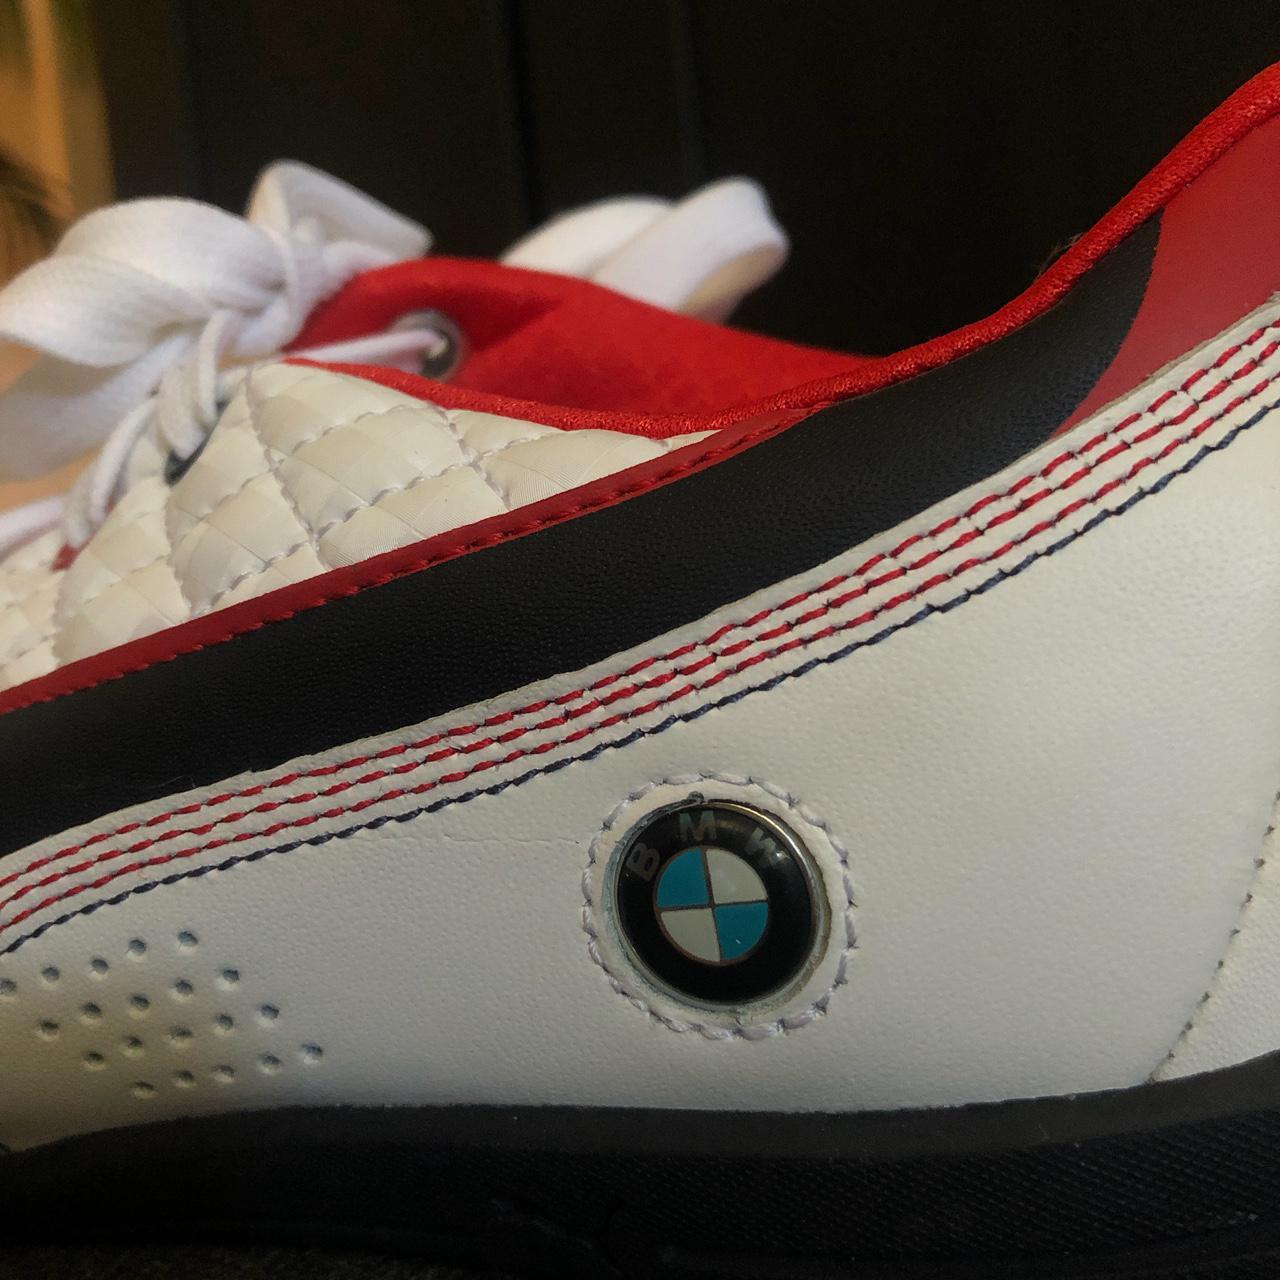 Product Image 3 - BMW Puma Men’s Sneakers Driving